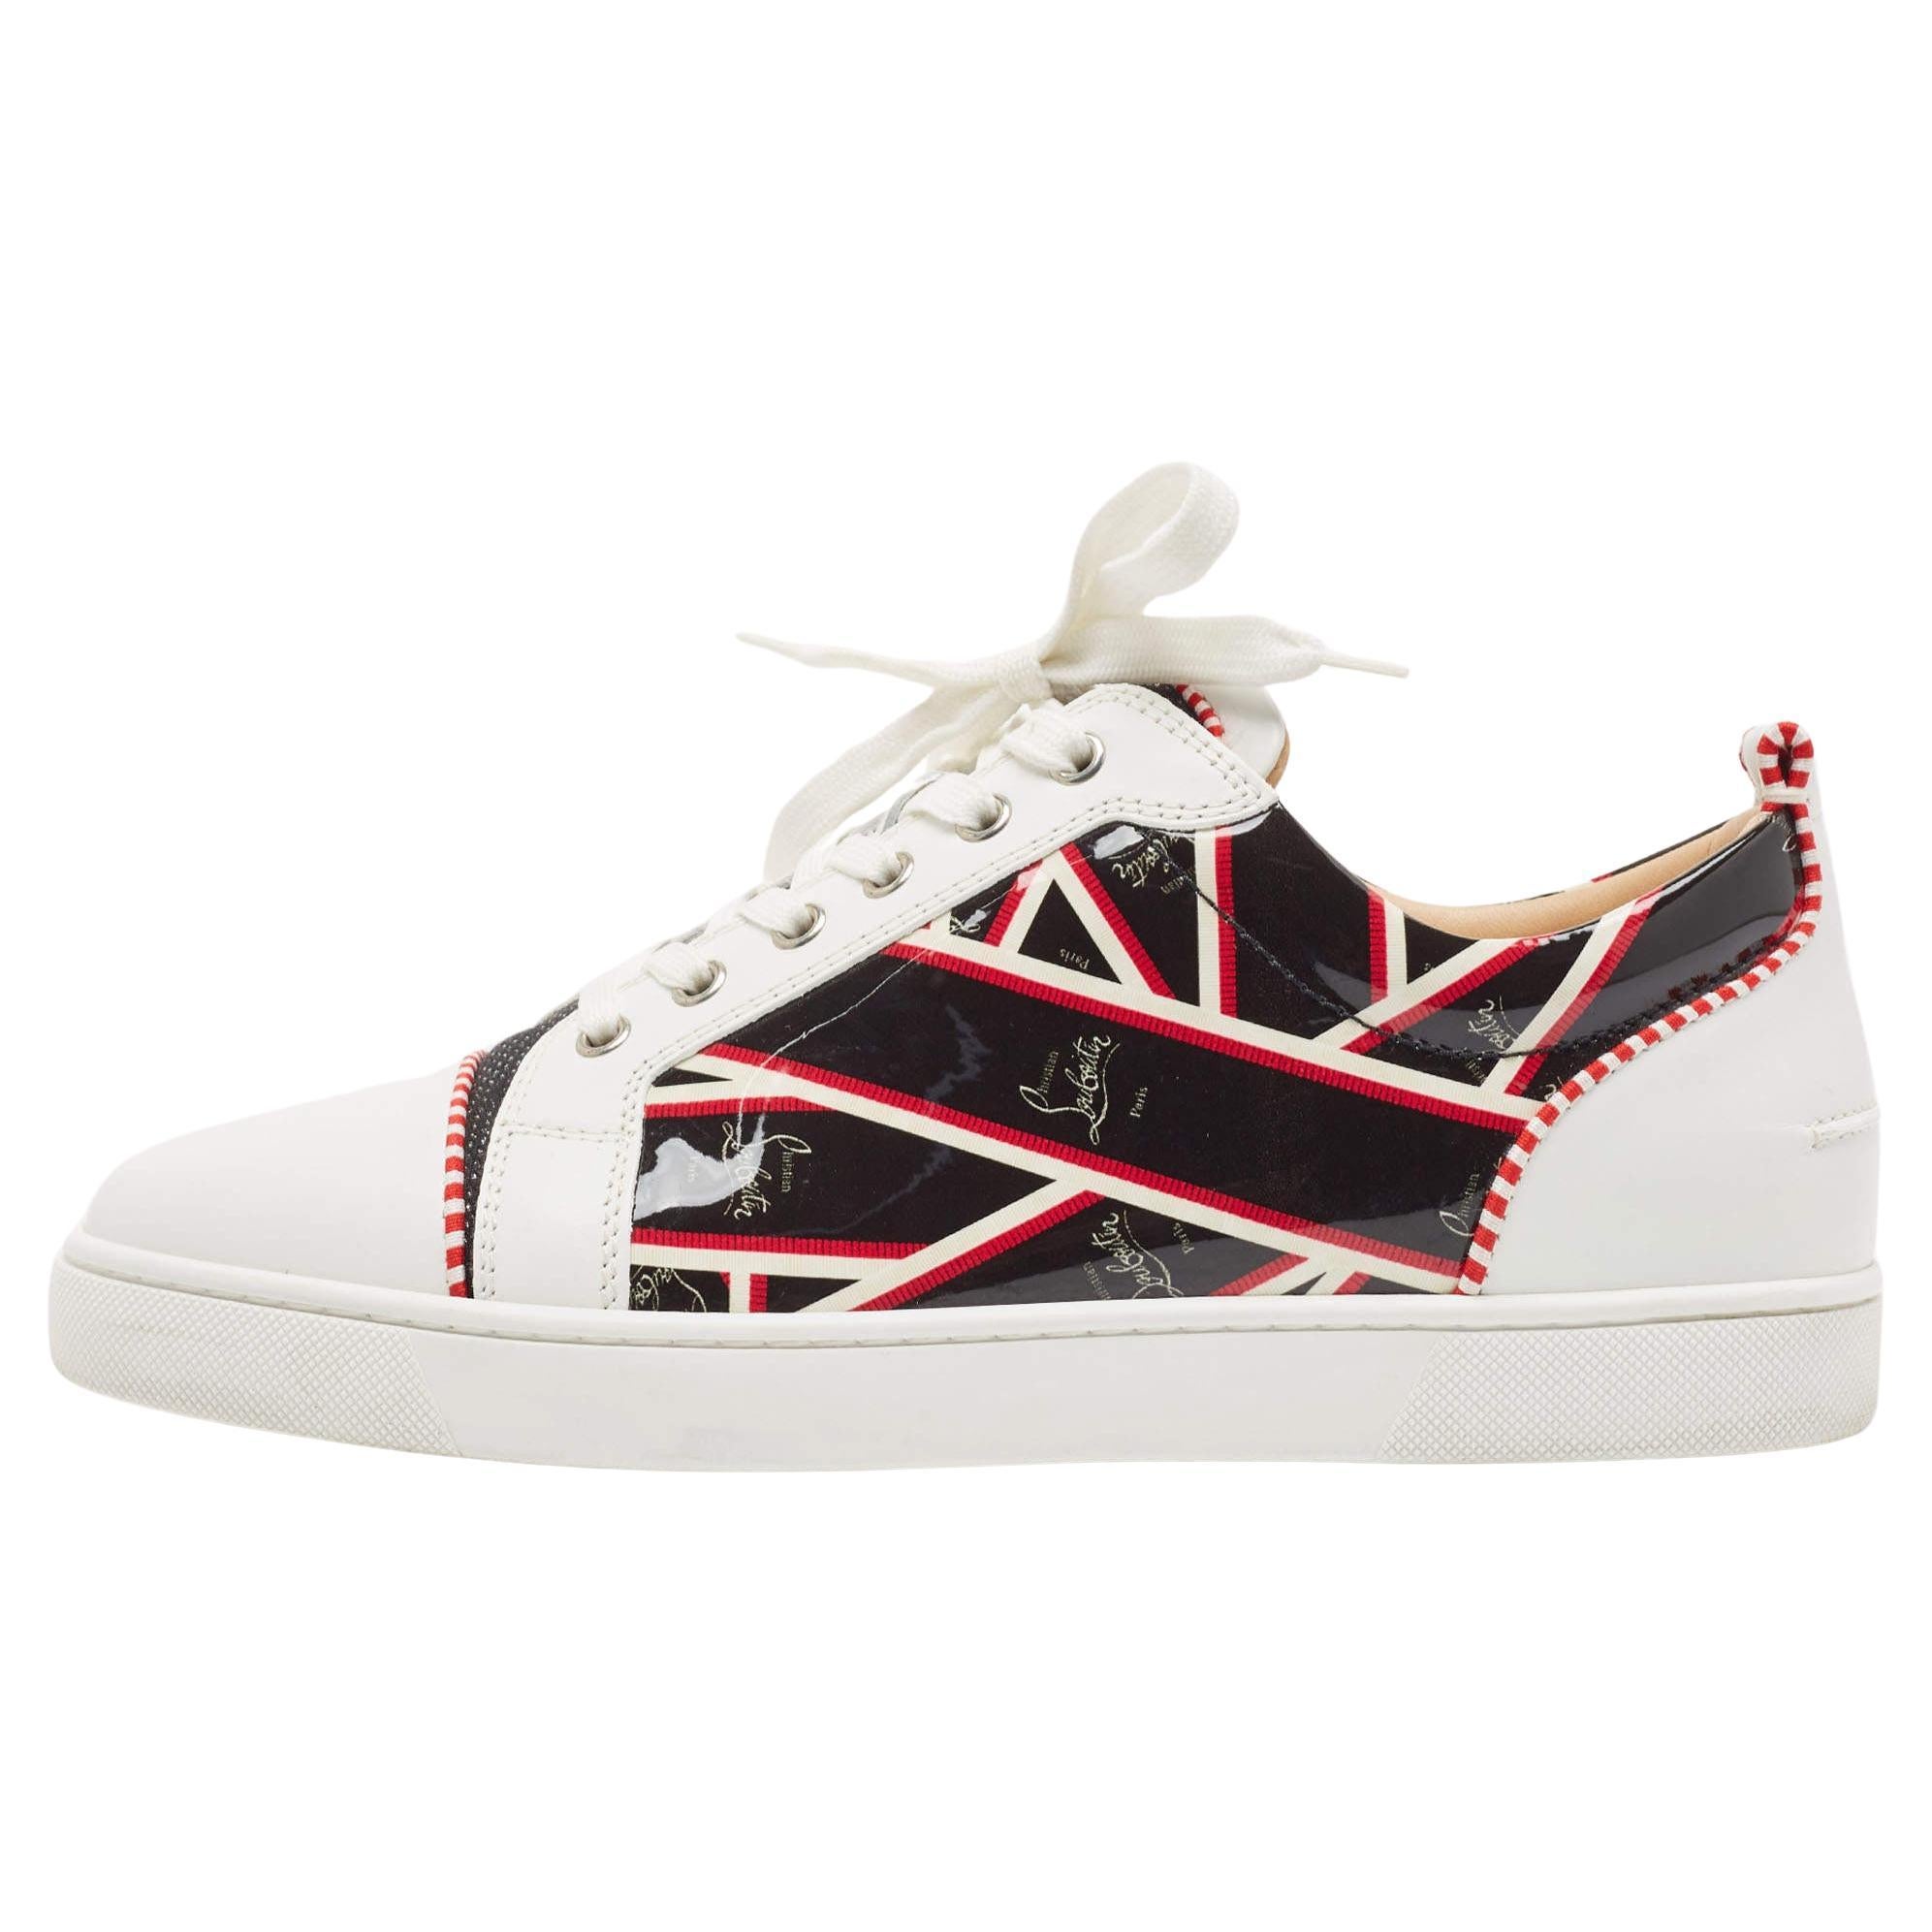 Christian Louboutin Printed Patent and Leather Orlato Sneakers Size 42.5 For Sale